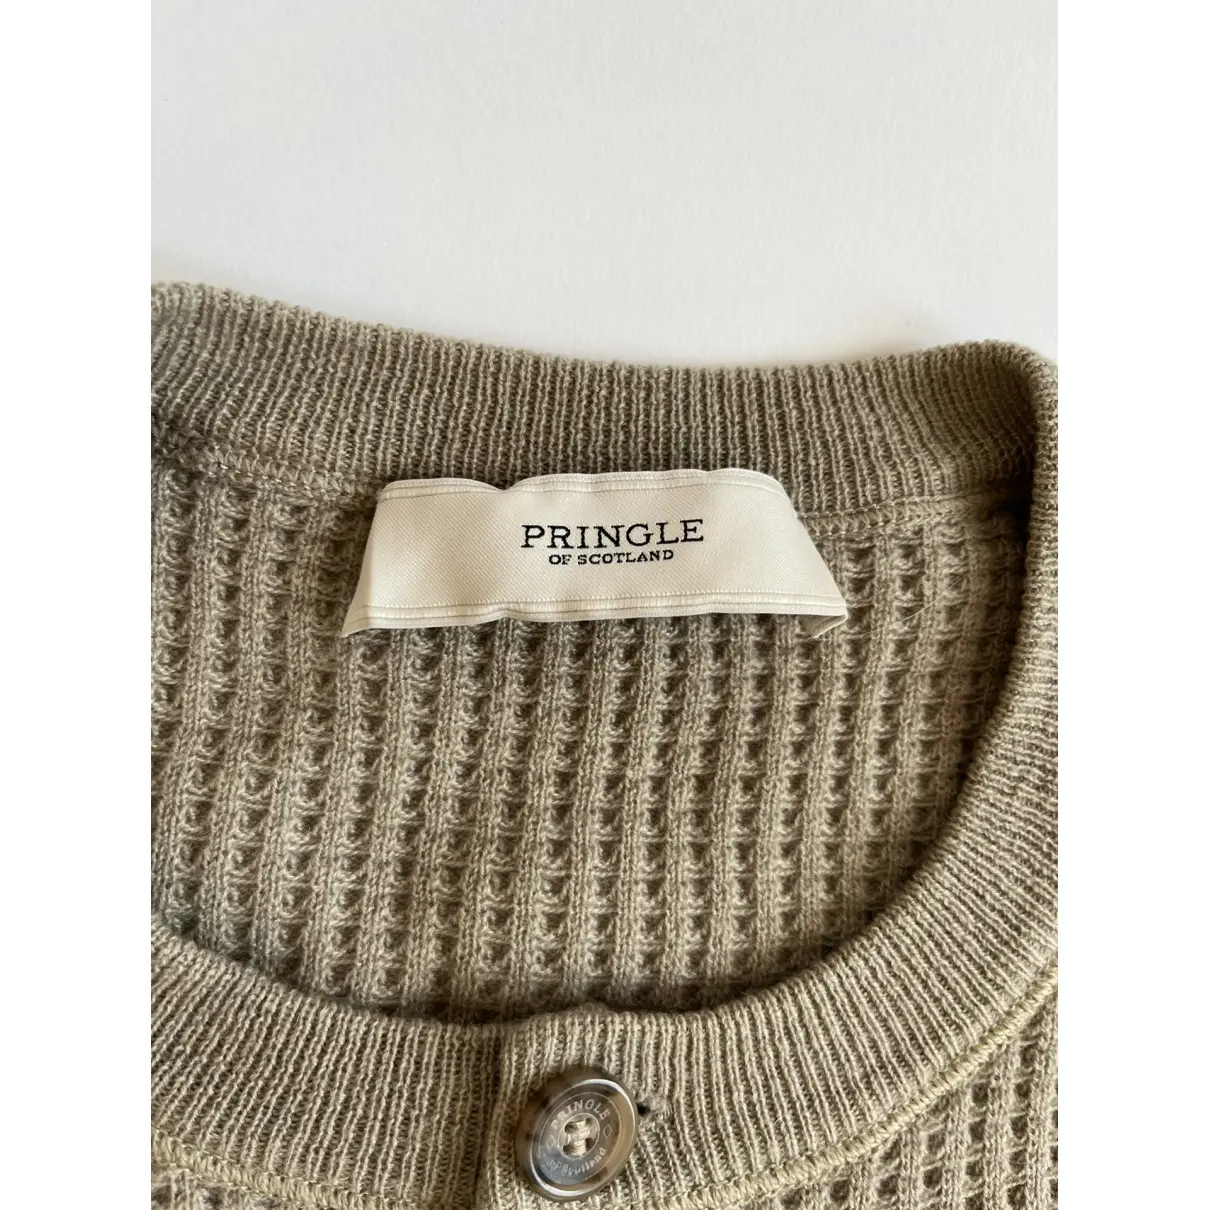 Buy Pringle Of Scotland Cashmere pull online